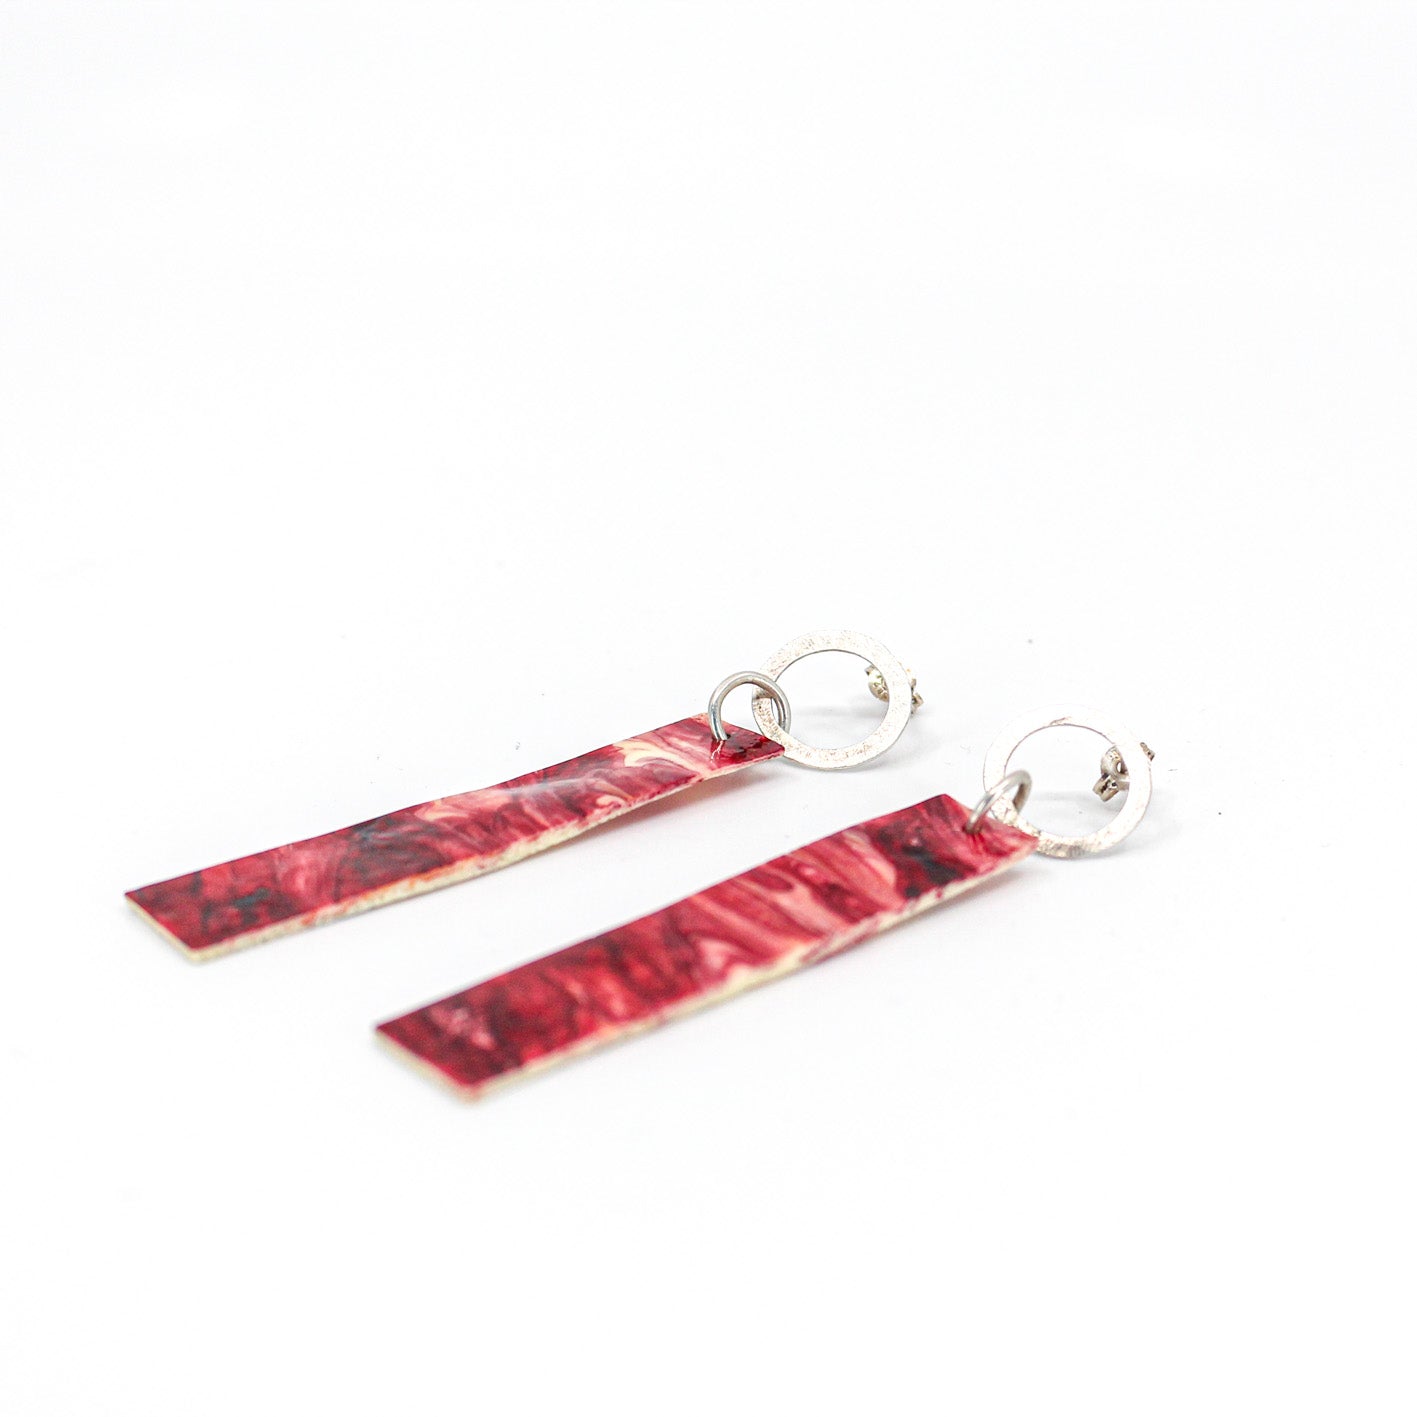 long dangling earrings • hammered sterling silver circle • red marbled resin element